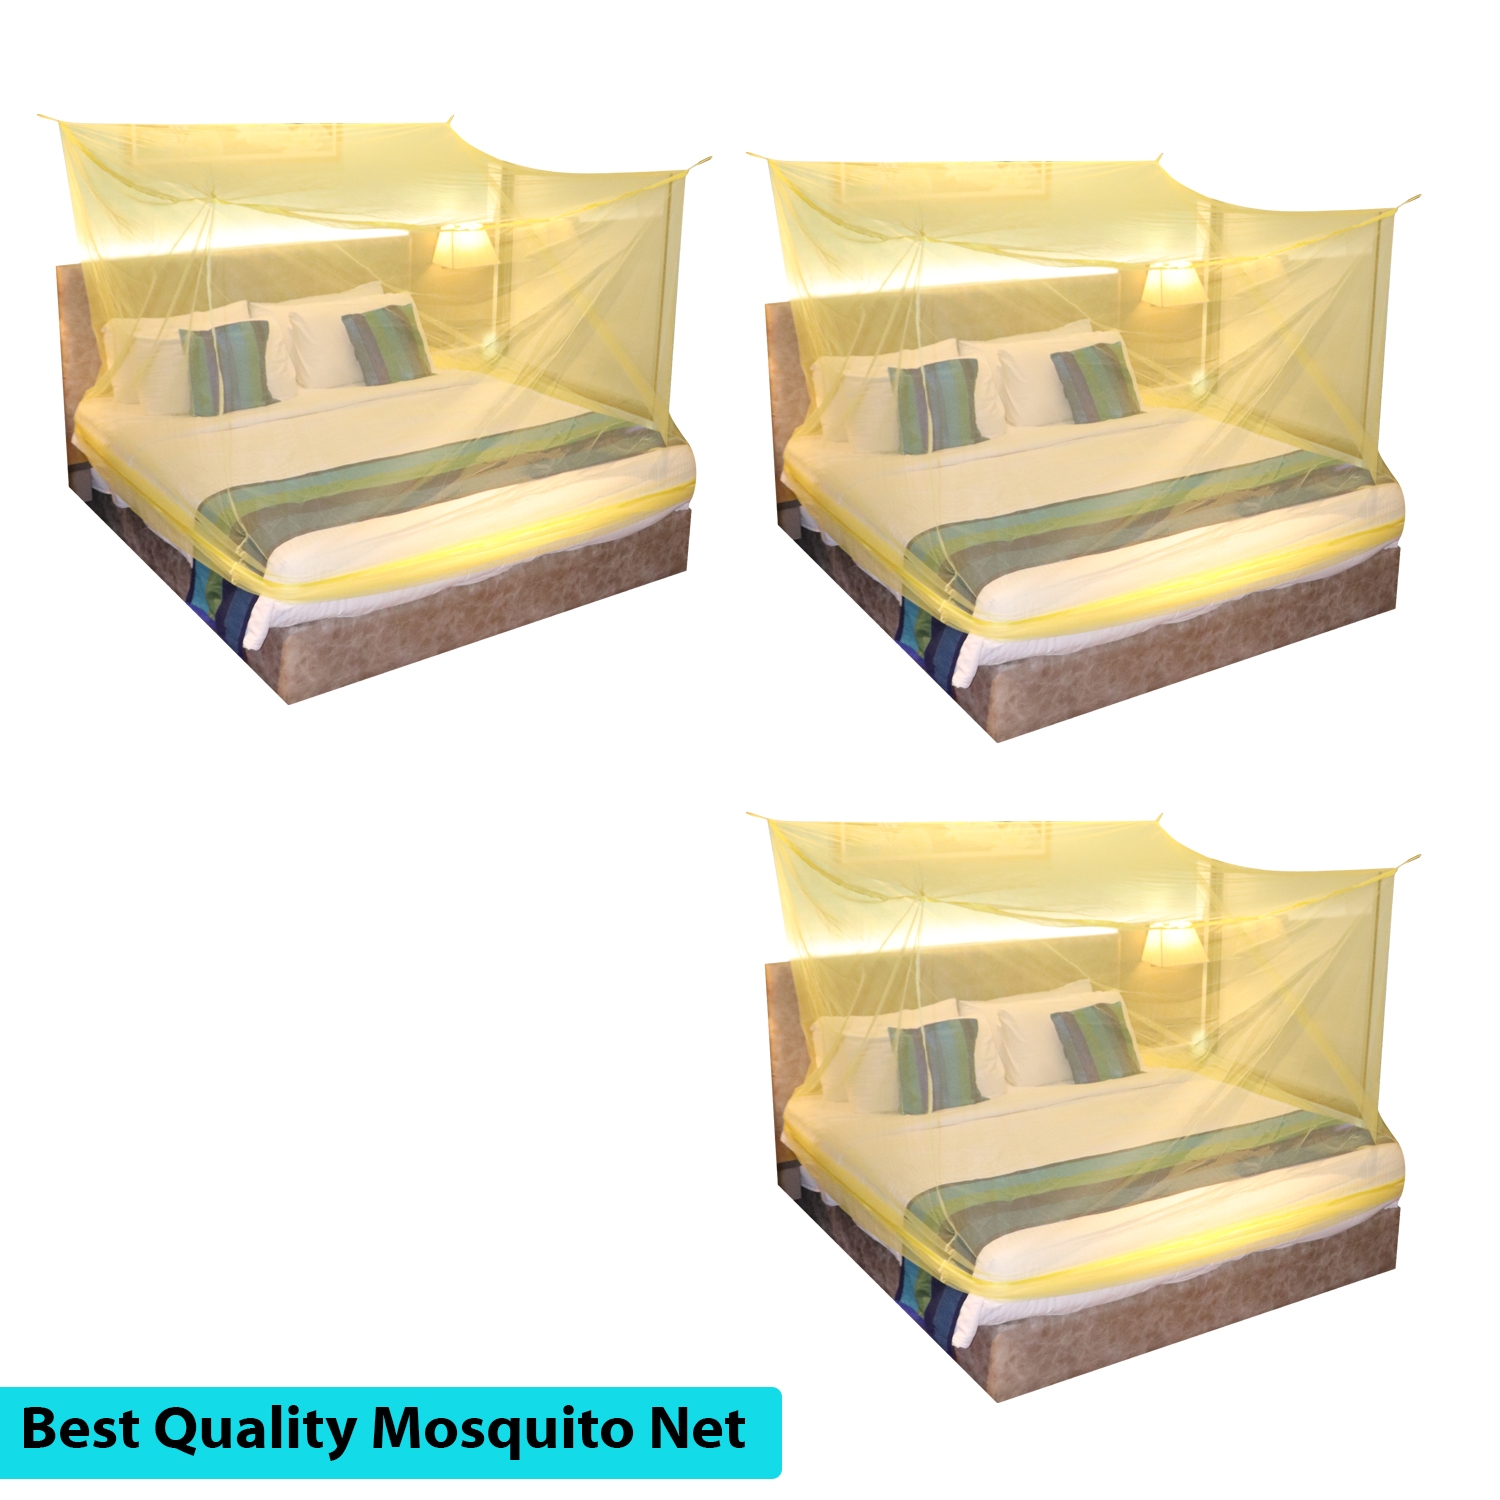 Paola Jewels | Mosquito Net for Double Bed, King-Size, Square Hanging Foldable Polyester Net YellowPack of 3